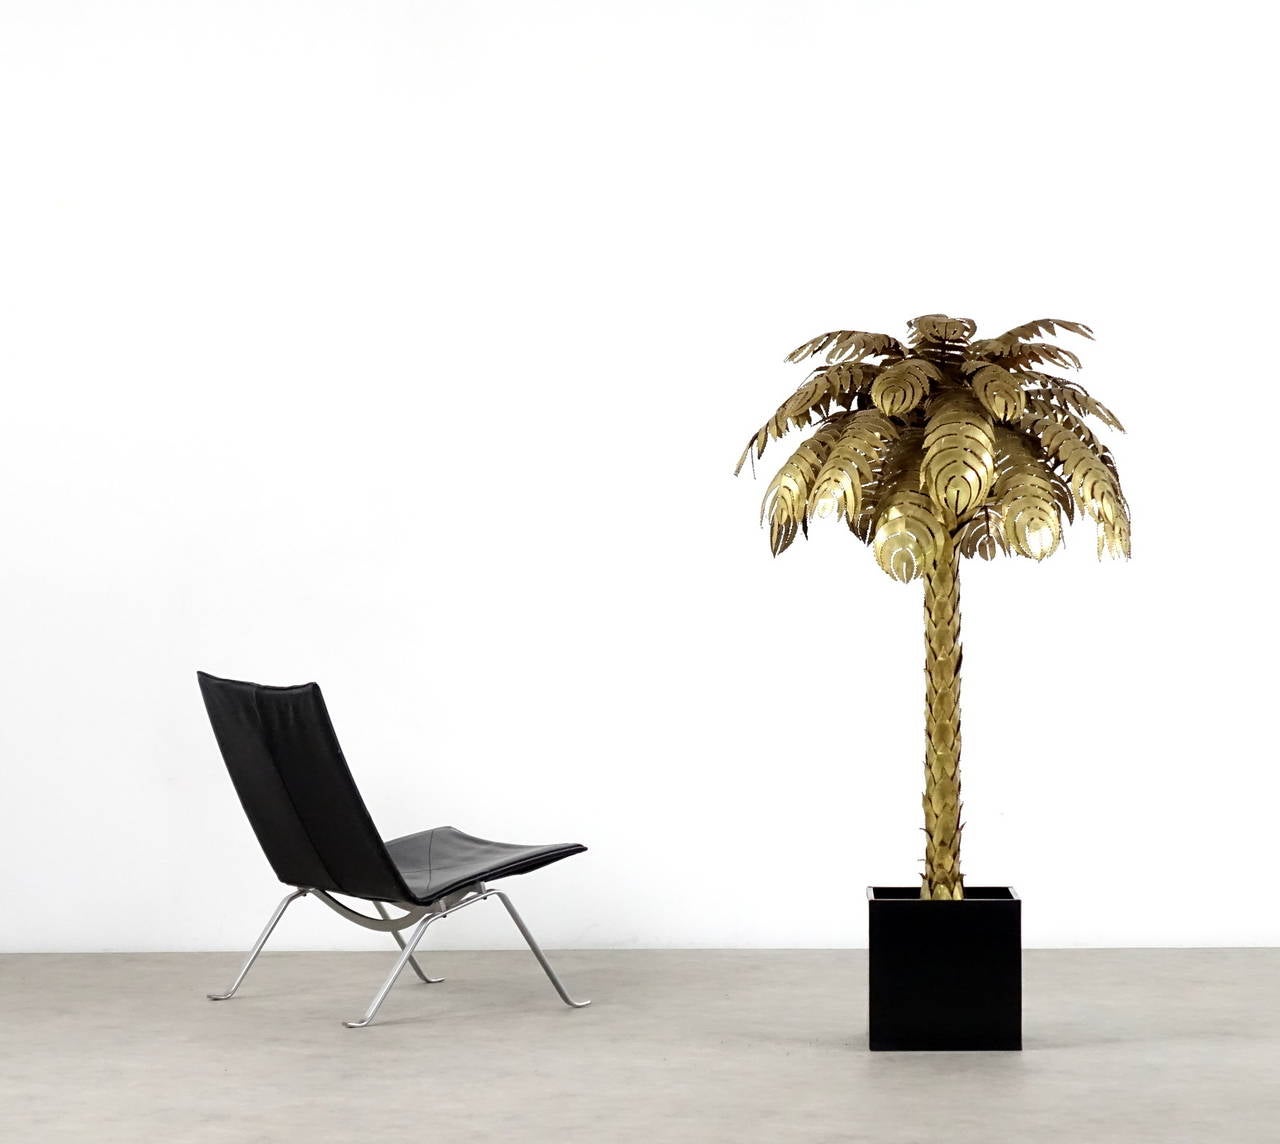 Floor lamp in the form of a palm tree, French design by Atelier Techoueyres for Maison Charles. Design by 1970. Construction with leaves and stem made of brass sheet, bucket with sides of black formica edging and brass. Equipped with five burners.